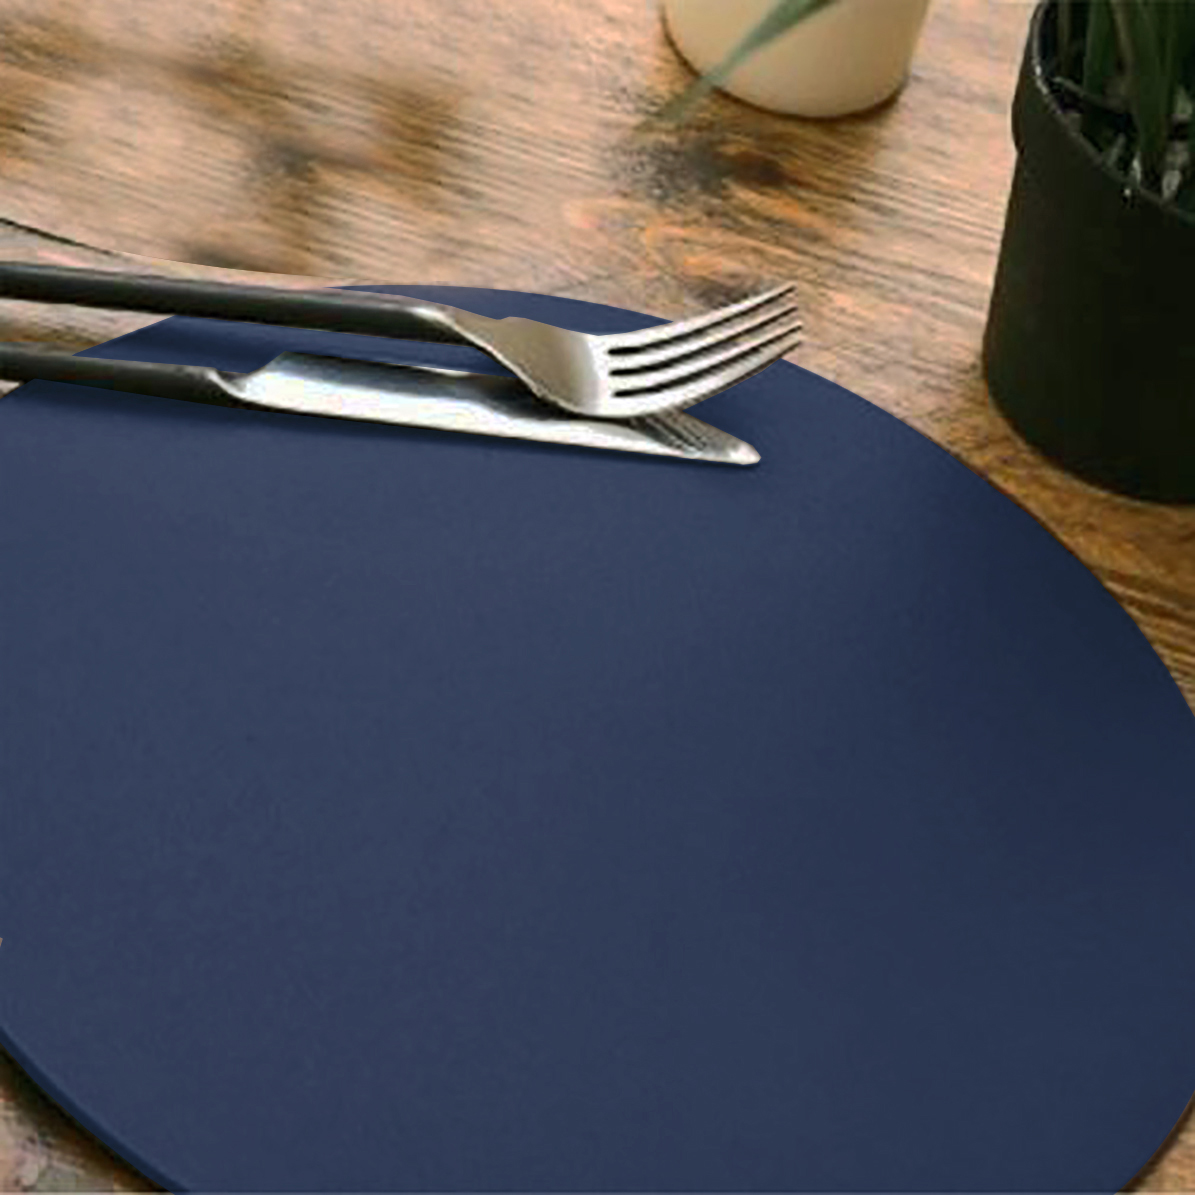 BLUE ROUND PU PLACEMAT